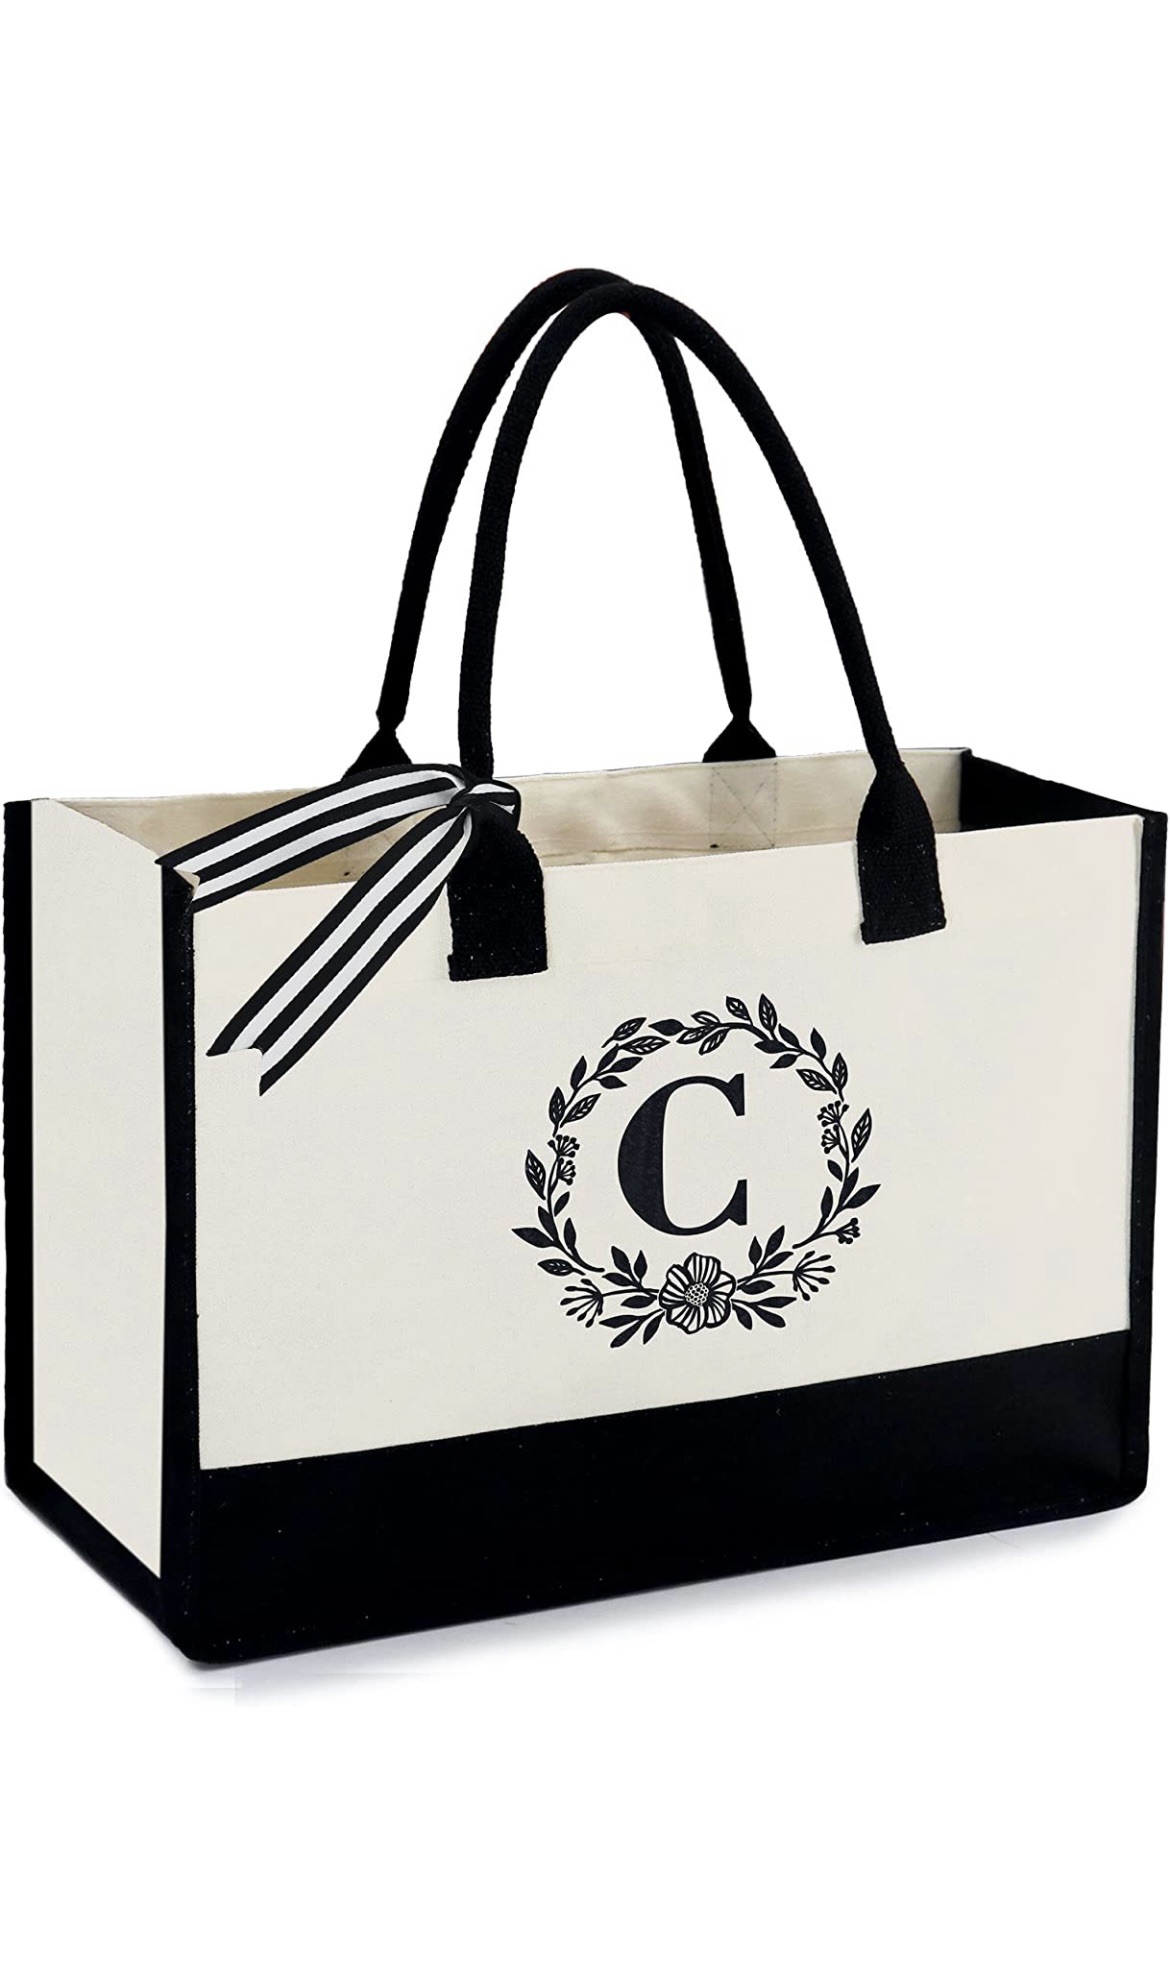 Amazon.com: BeeGreen Canvas Tote Bag Large Utility Tote with Zipper Pocket 13OZ Canvas Monogrammed Personalized Tote Bag Beach Bag